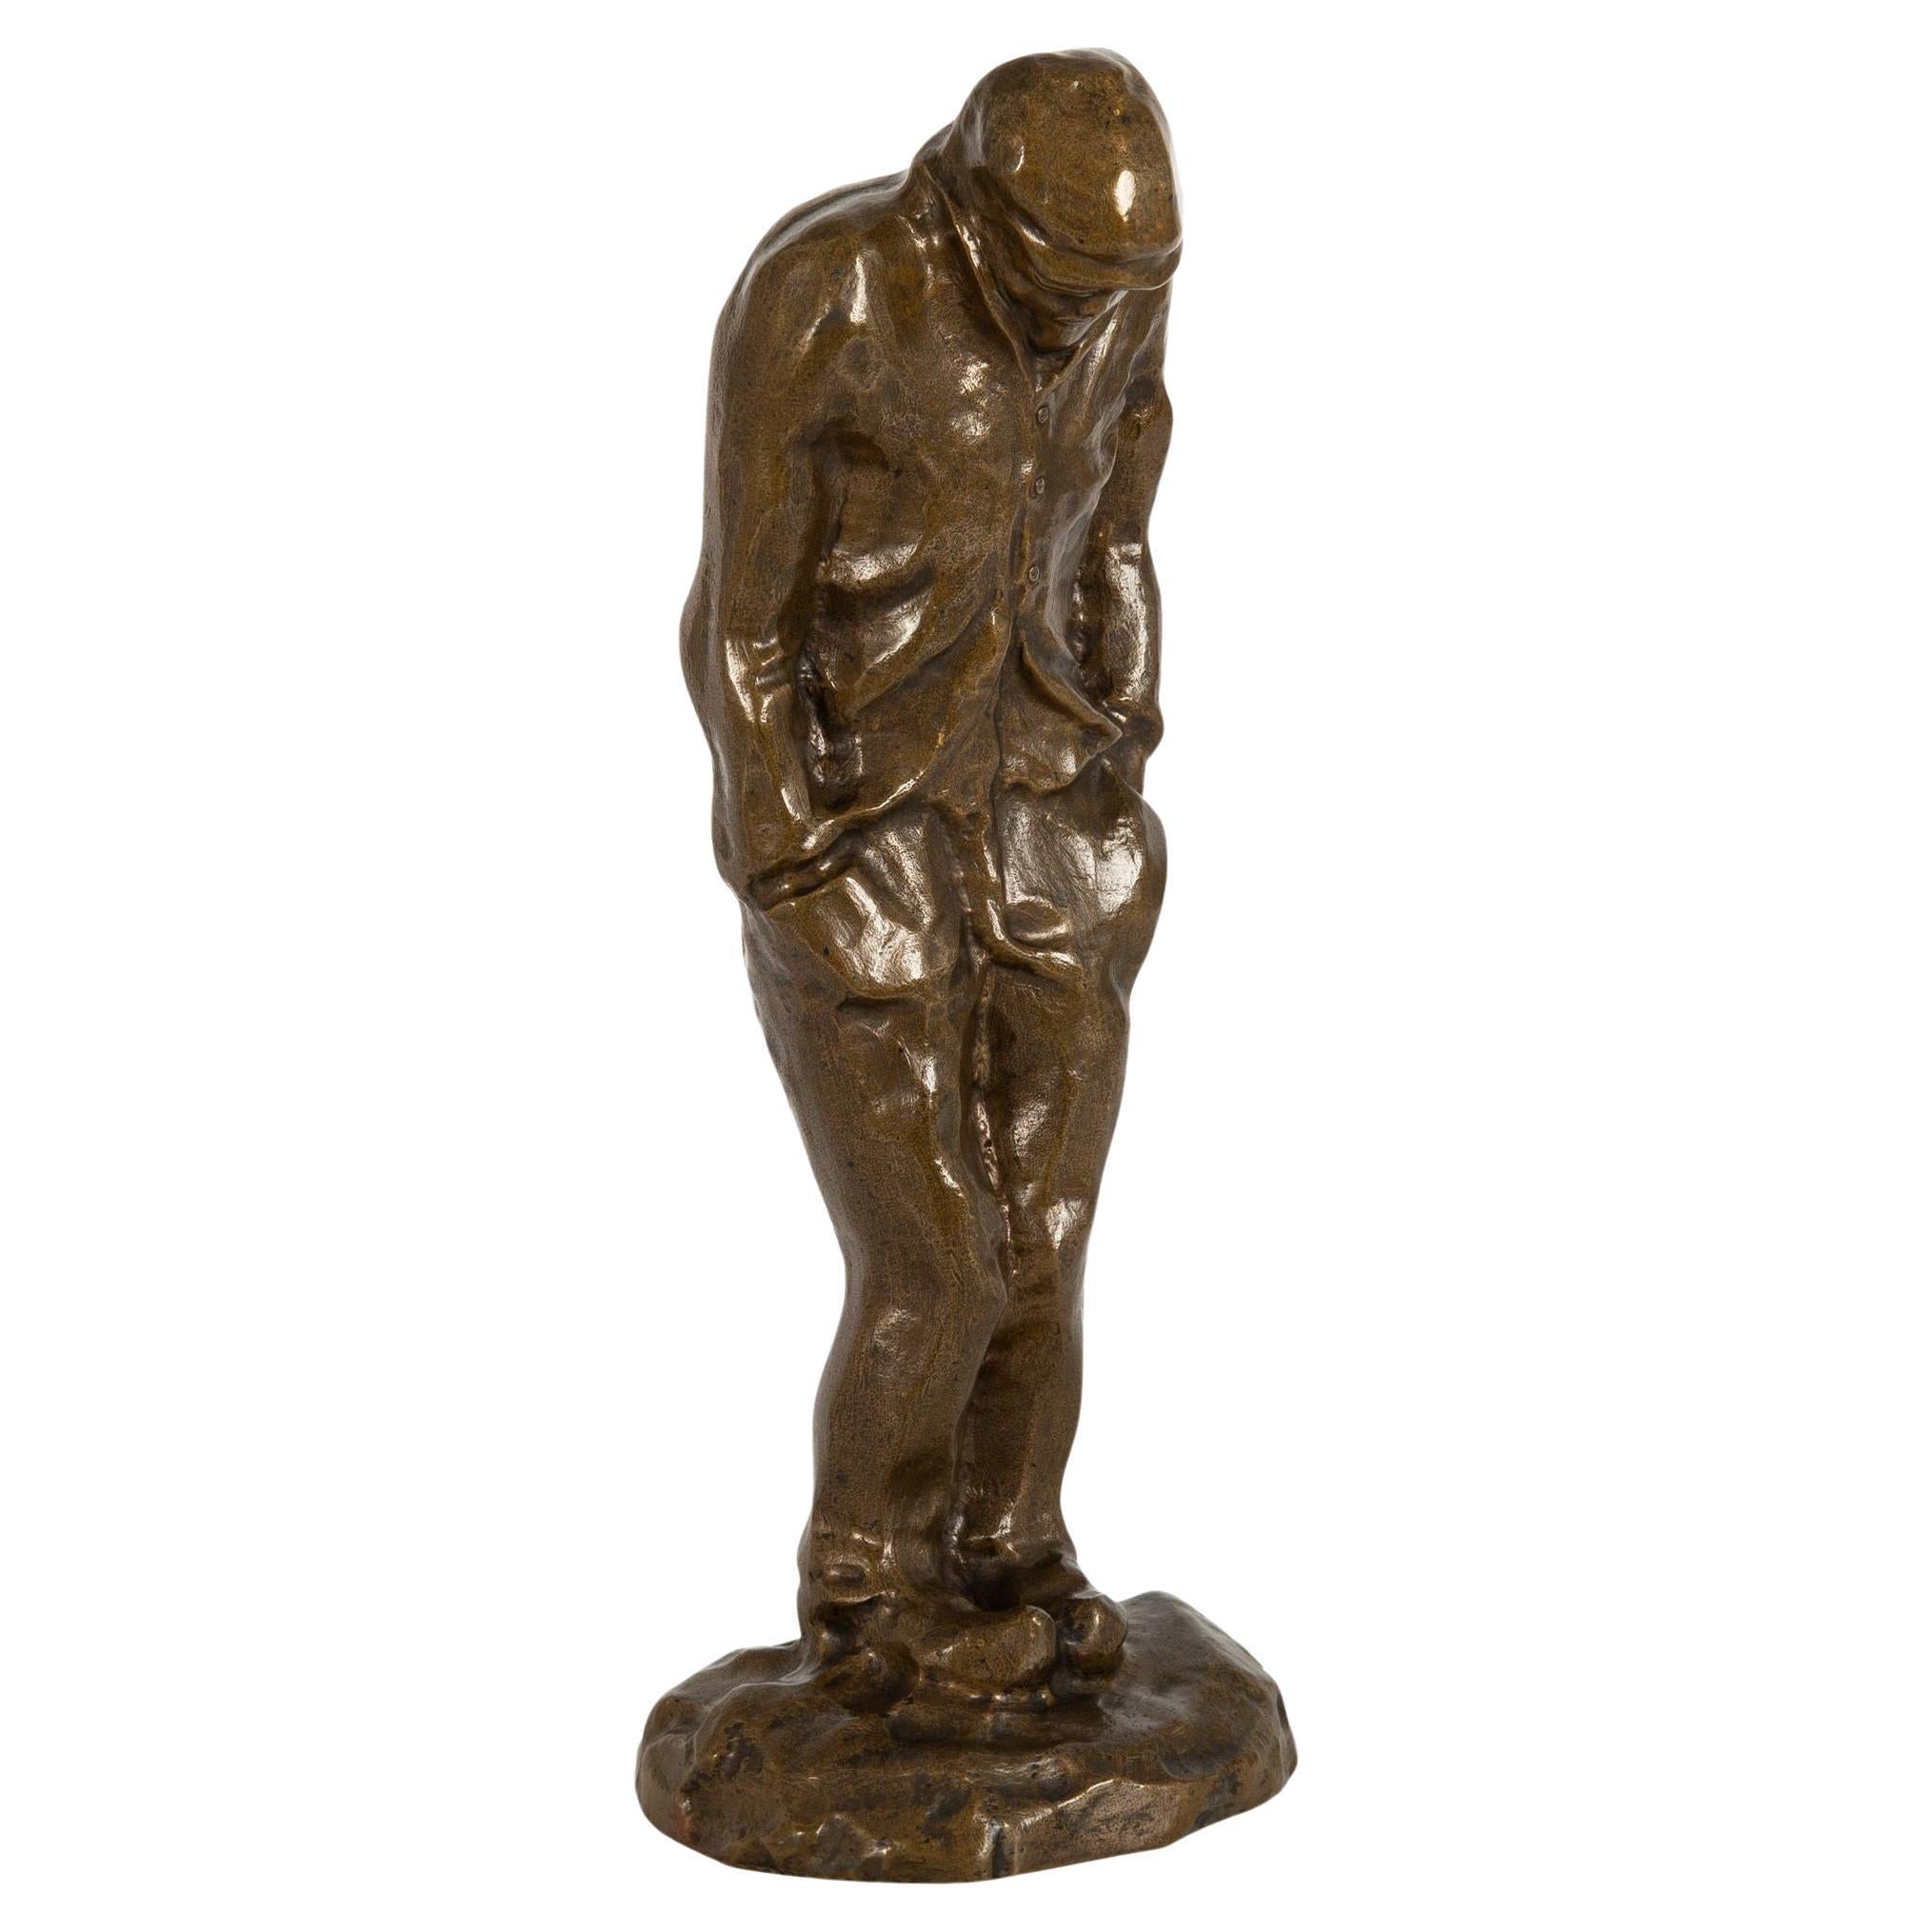 French Bronze Sculpture “Shivering Worker” in manner of Constantin Meunier For Sale